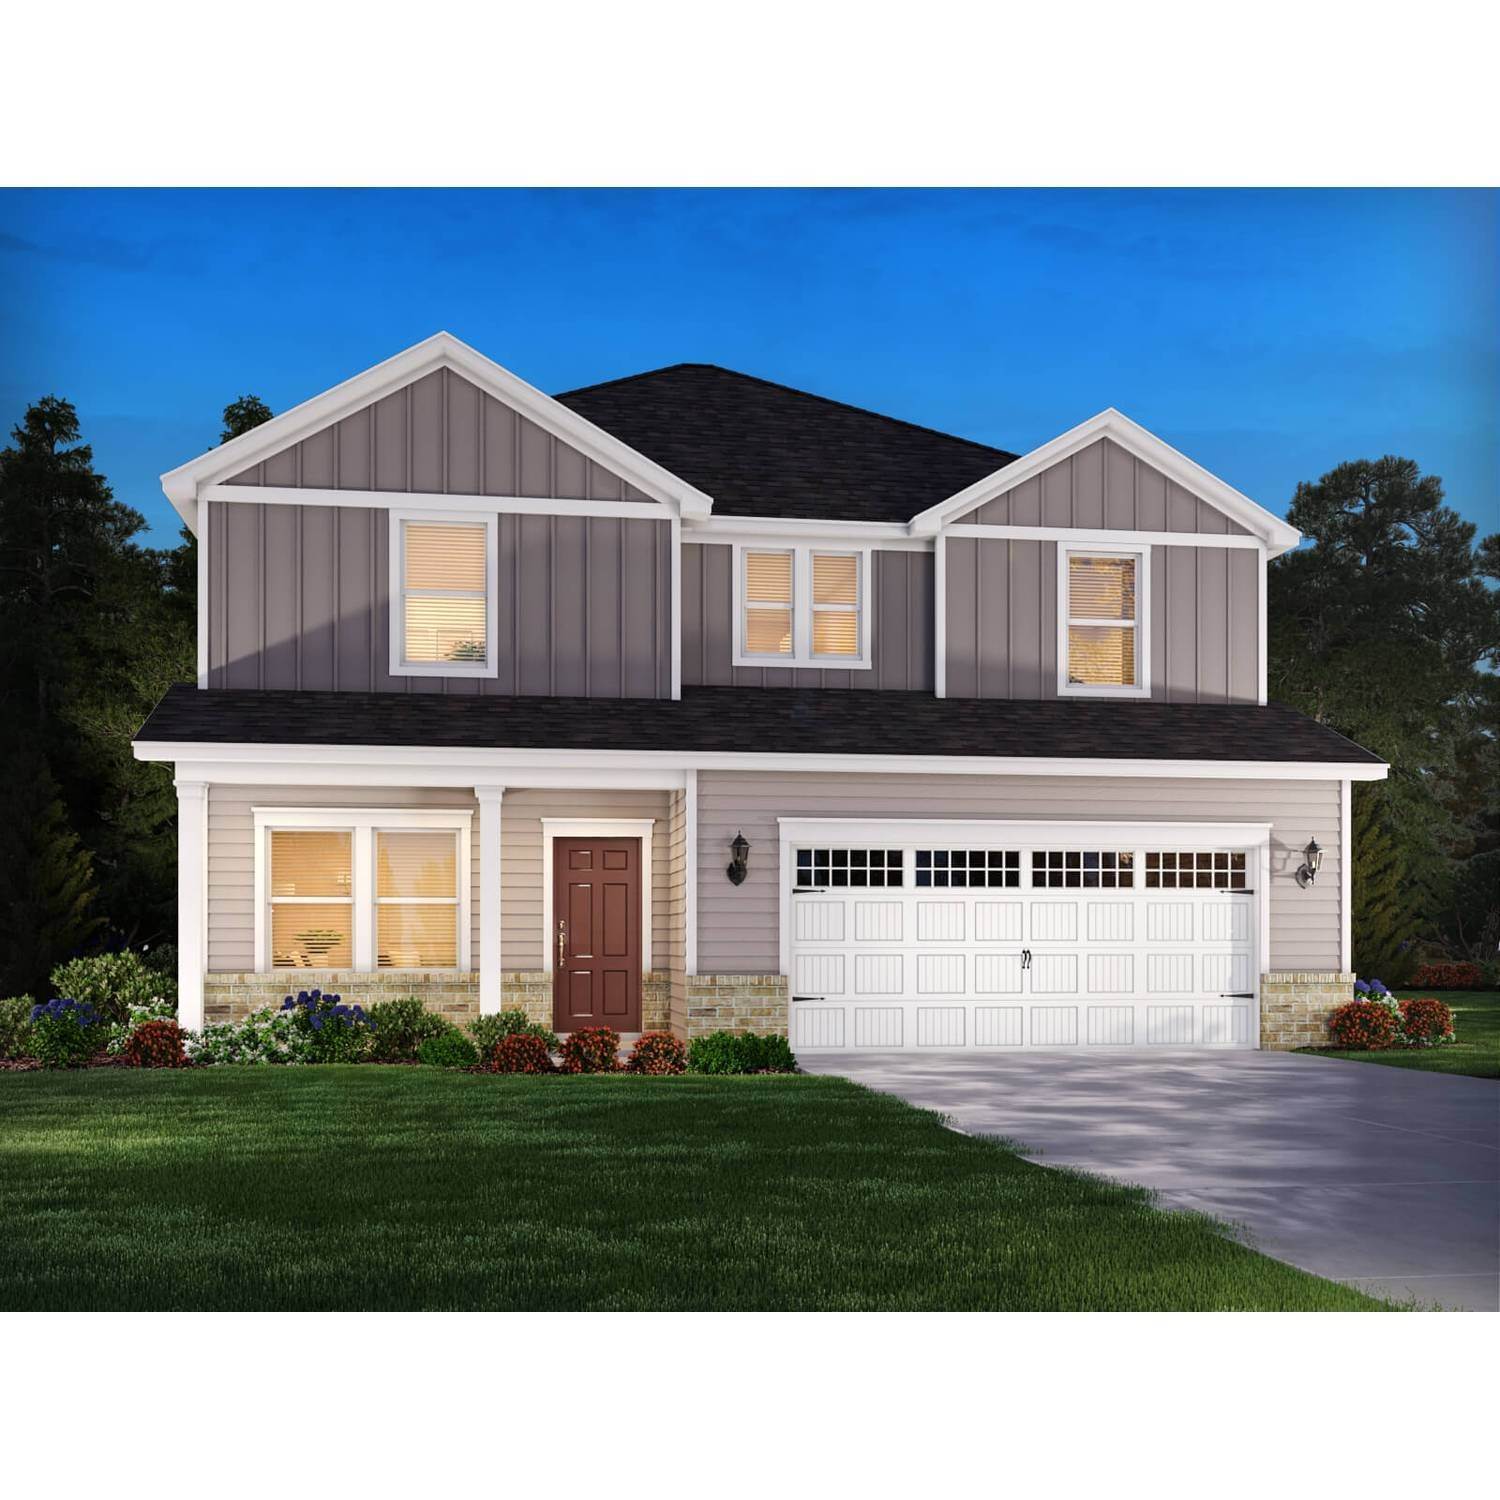 Single Family for Sale at Raleigh, NC 27616